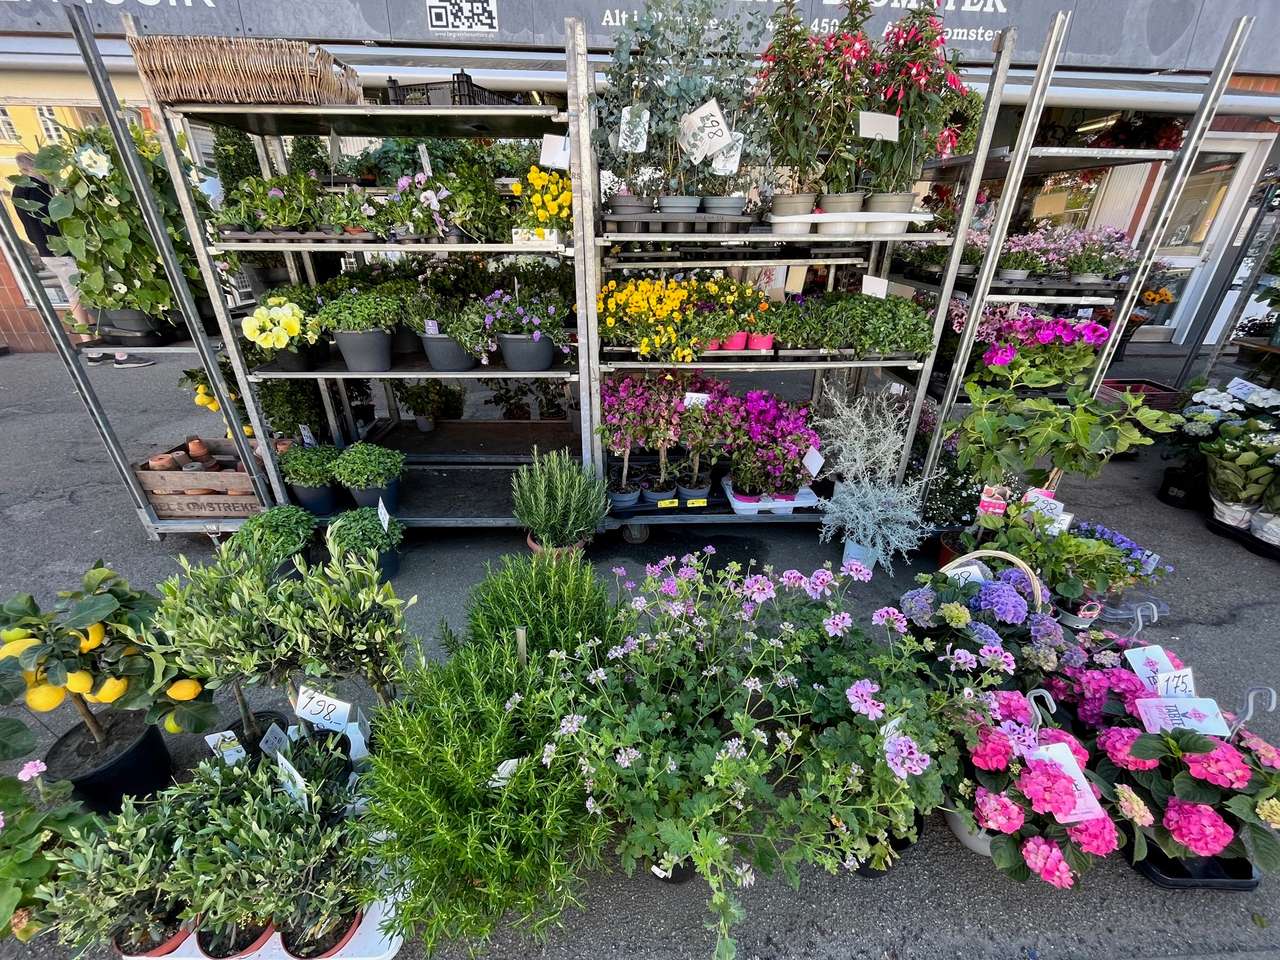 Flowershop in Denmark puzzle online from photo